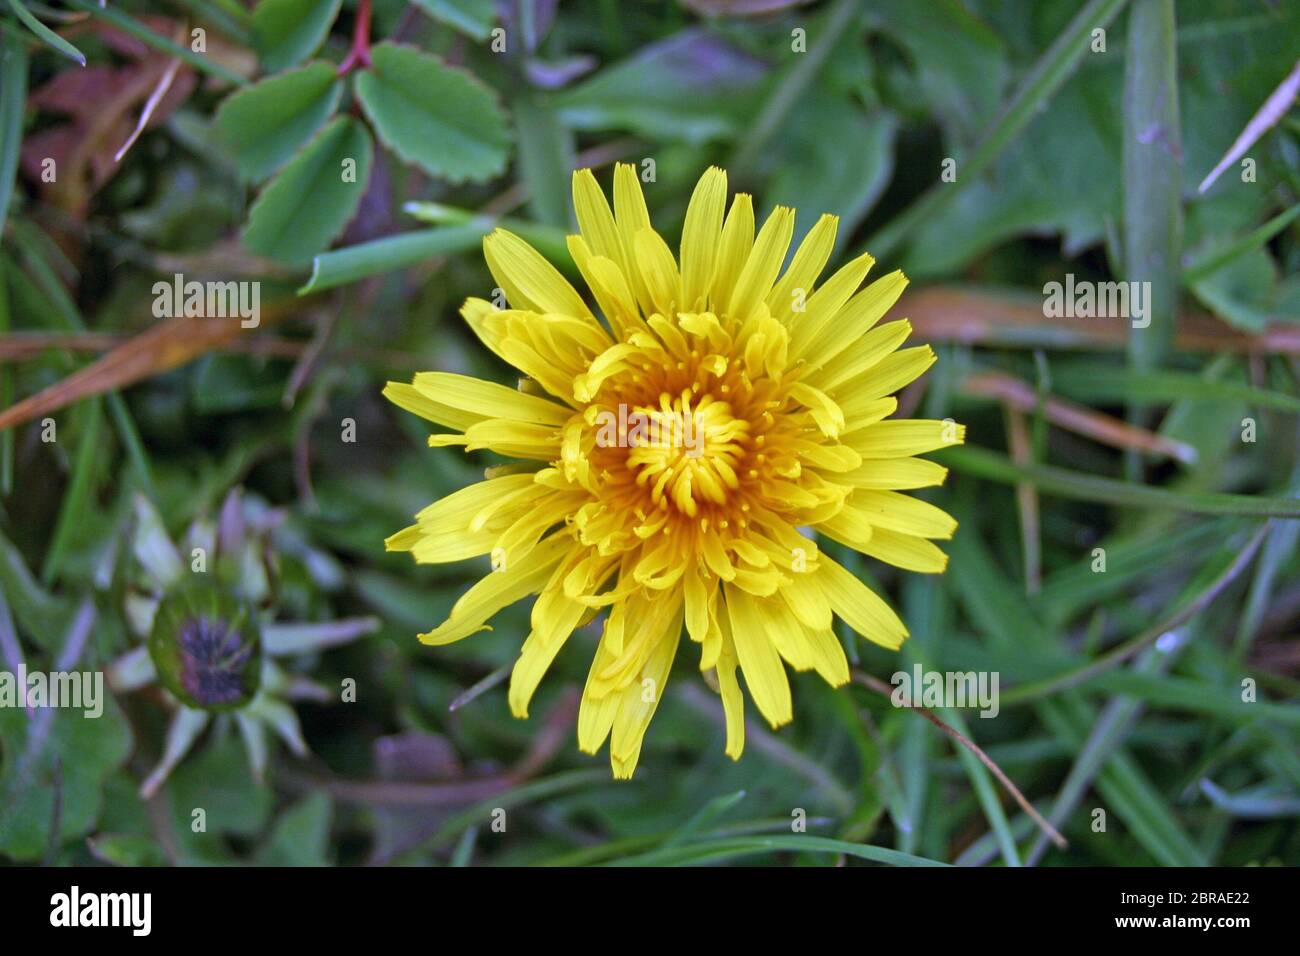 Yellow dandelion, probably Taraxacum officinale, flower viewed from above. Growing in a wet wildflower rich hay meadow. Background of leaves of grasse Stock Photo